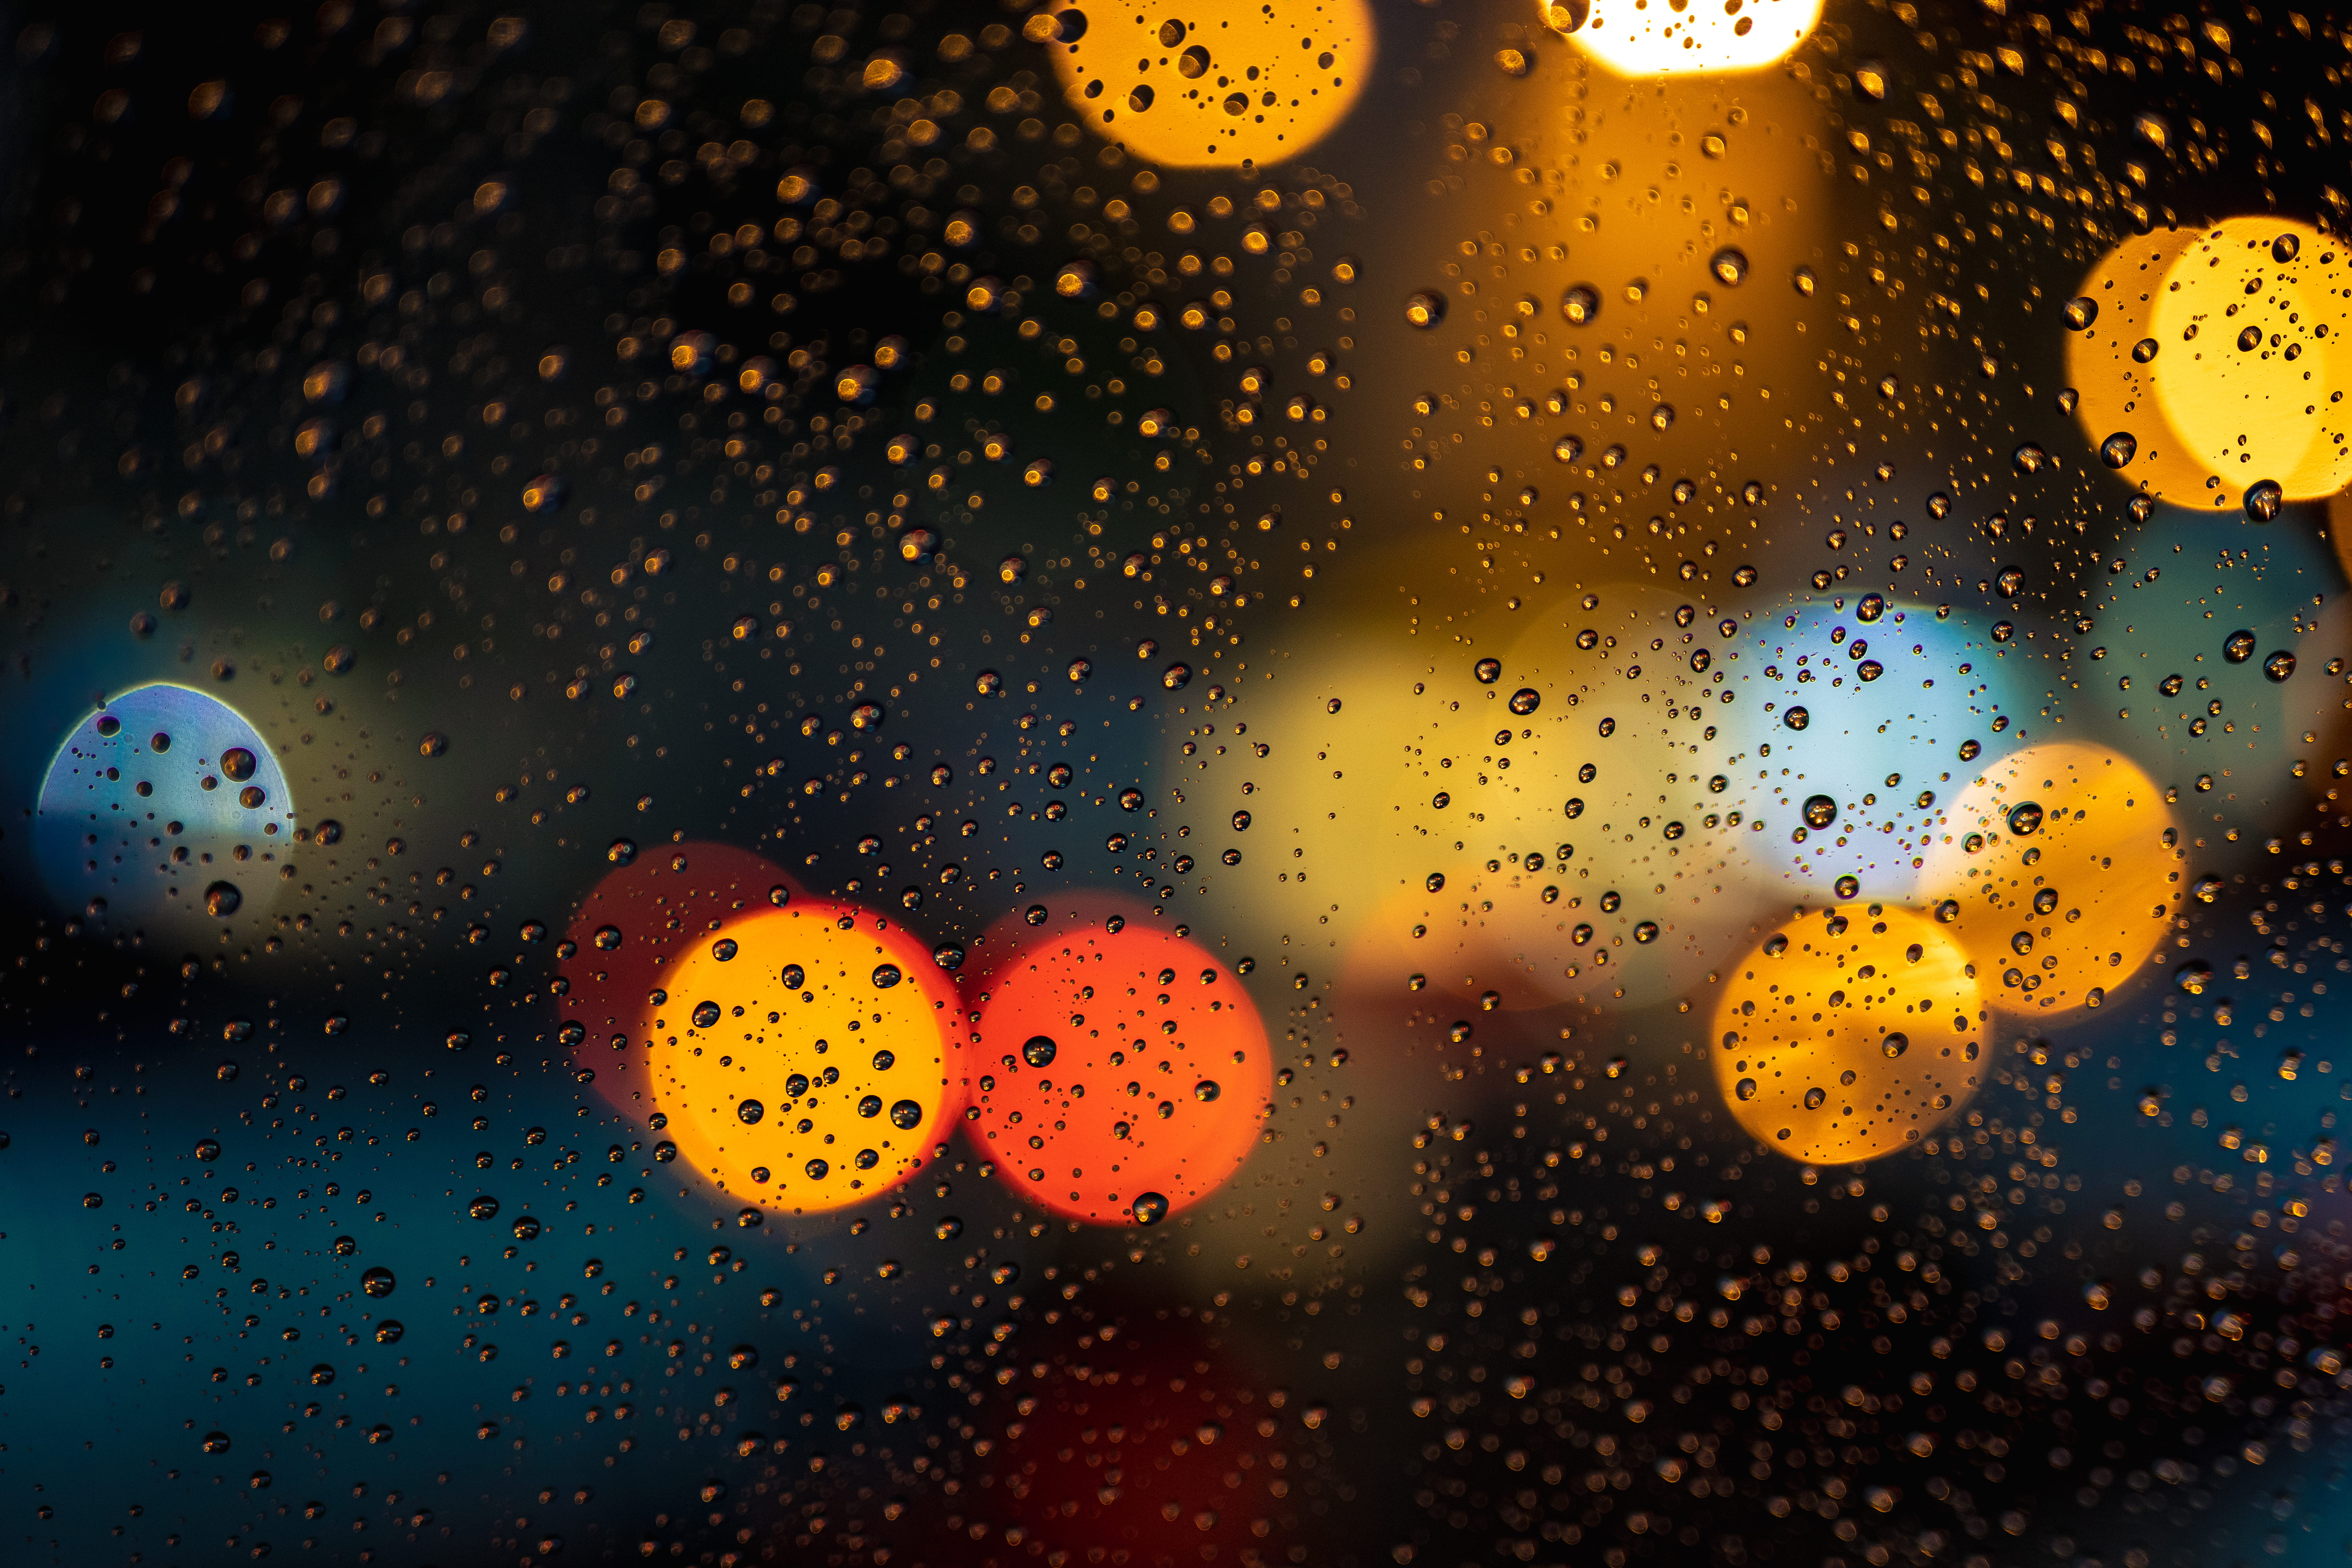 blurred background, close-up, colors, dark, droplets, drops of water